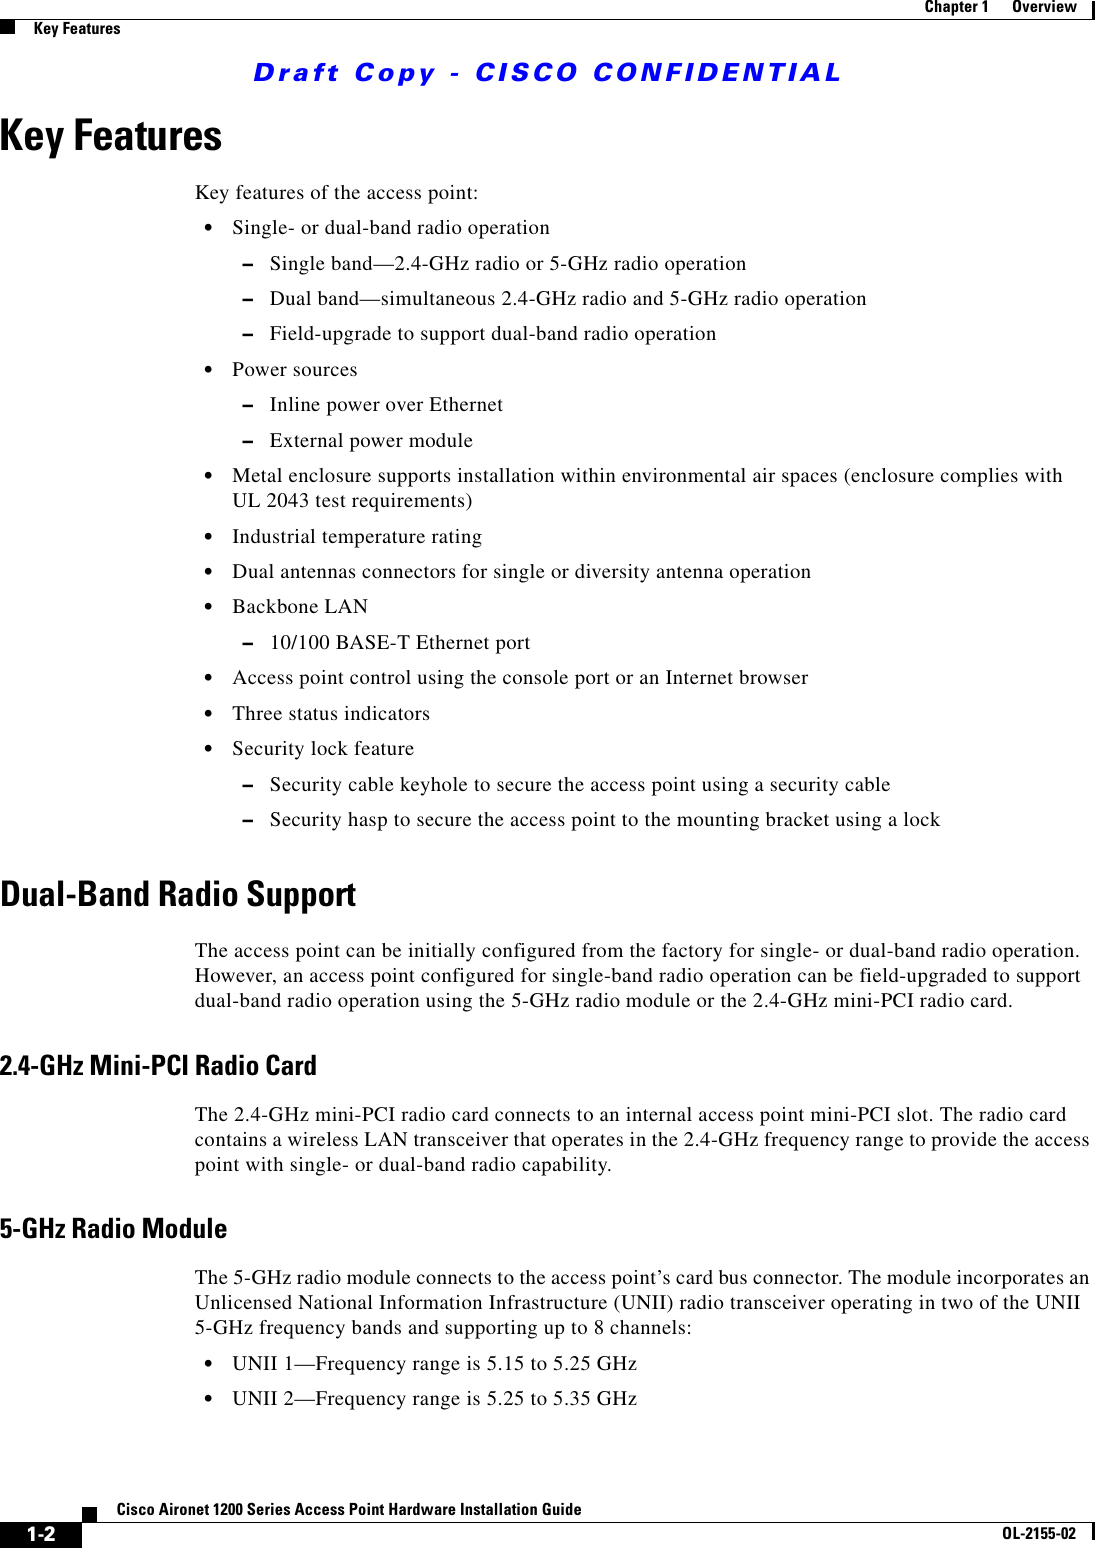 Draft Copy - CISCO CONFIDENTIAL 1-2Cisco Aironet 1200 Series Access Point Hardware Installation GuideOL-2155-02Chapter 1      OverviewKey FeaturesKey FeaturesKey features of the access point:•Single- or dual-band radio operation–Single band—2.4-GHz radio or 5-GHz radio operation–Dual band—simultaneous 2.4-GHz radio and 5-GHz radio operation–Field-upgrade to support dual-band radio operation •Power sources–Inline power over Ethernet –External power module•Metal enclosure supports installation within environmental air spaces (enclosure complies with UL 2043 test requirements)•Industrial temperature rating•Dual antennas connectors for single or diversity antenna operation•Backbone LAN–10/100 BASE-T Ethernet port•Access point control using the console port or an Internet browser •Three status indicators•Security lock feature–Security cable keyhole to secure the access point using a security cable–Security hasp to secure the access point to the mounting bracket using a lockDual-Band Radio SupportThe access point can be initially configured from the factory for single- or dual-band radio operation. However, an access point configured for single-band radio operation can be field-upgraded to support dual-band radio operation using the 5-GHz radio module or the 2.4-GHz mini-PCI radio card. 2.4-GHz Mini-PCI Radio CardThe 2.4-GHz mini-PCI radio card connects to an internal access point mini-PCI slot. The radio card contains a wireless LAN transceiver that operates in the 2.4-GHz frequency range to provide the access point with single- or dual-band radio capability. 5-GHz Radio ModuleThe 5-GHz radio module connects to the access point’s card bus connector. The module incorporates an Unlicensed National Information Infrastructure (UNII) radio transceiver operating in two of the UNII 5-GHz frequency bands and supporting up to 8 channels:•UNII 1—Frequency range is 5.15 to 5.25 GHz •UNII 2—Frequency range is 5.25 to 5.35 GHz